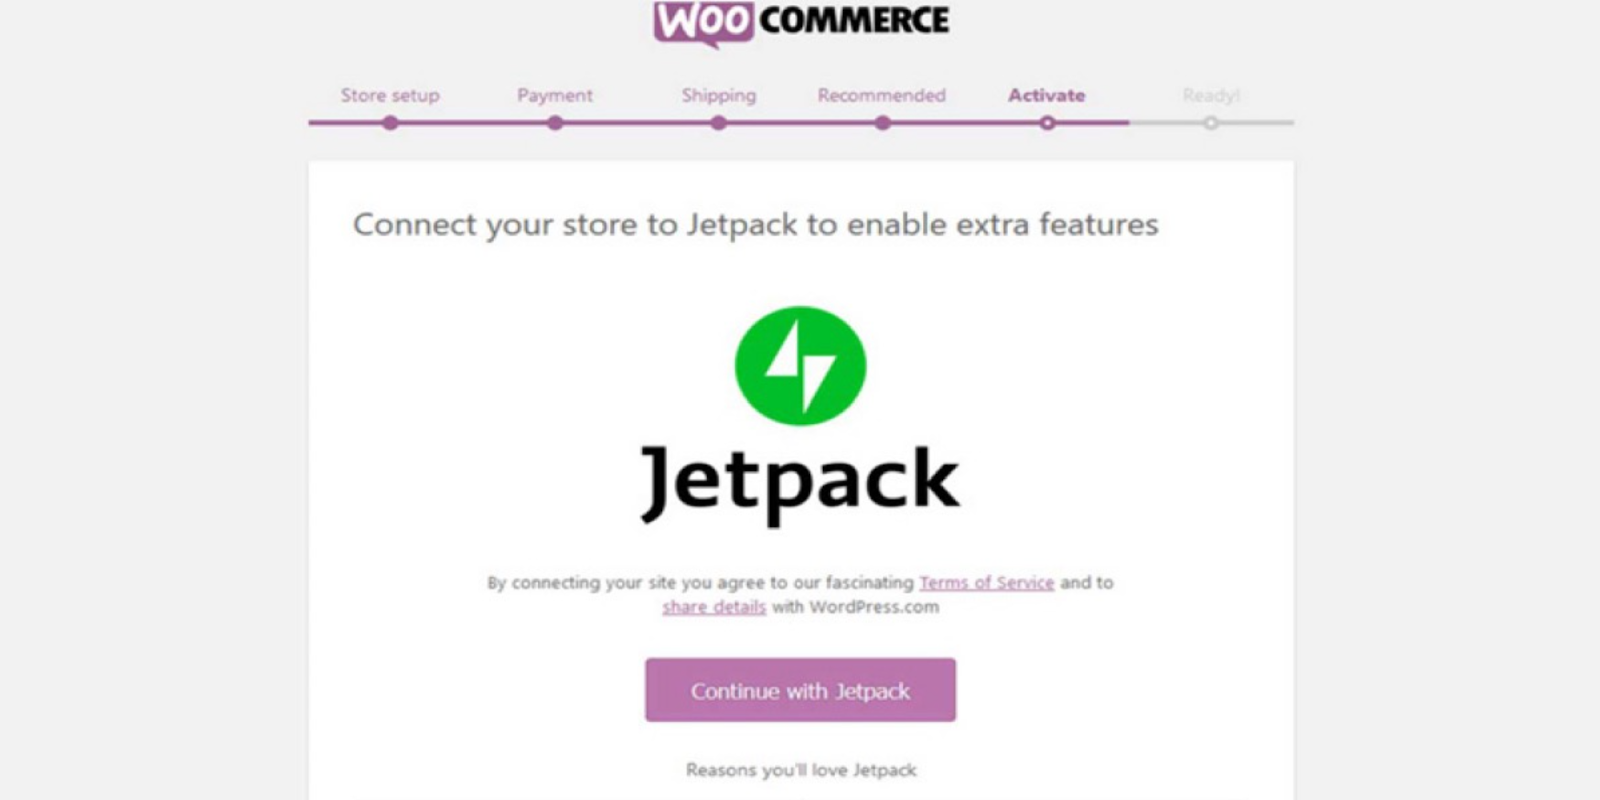 Connect with Jetpack